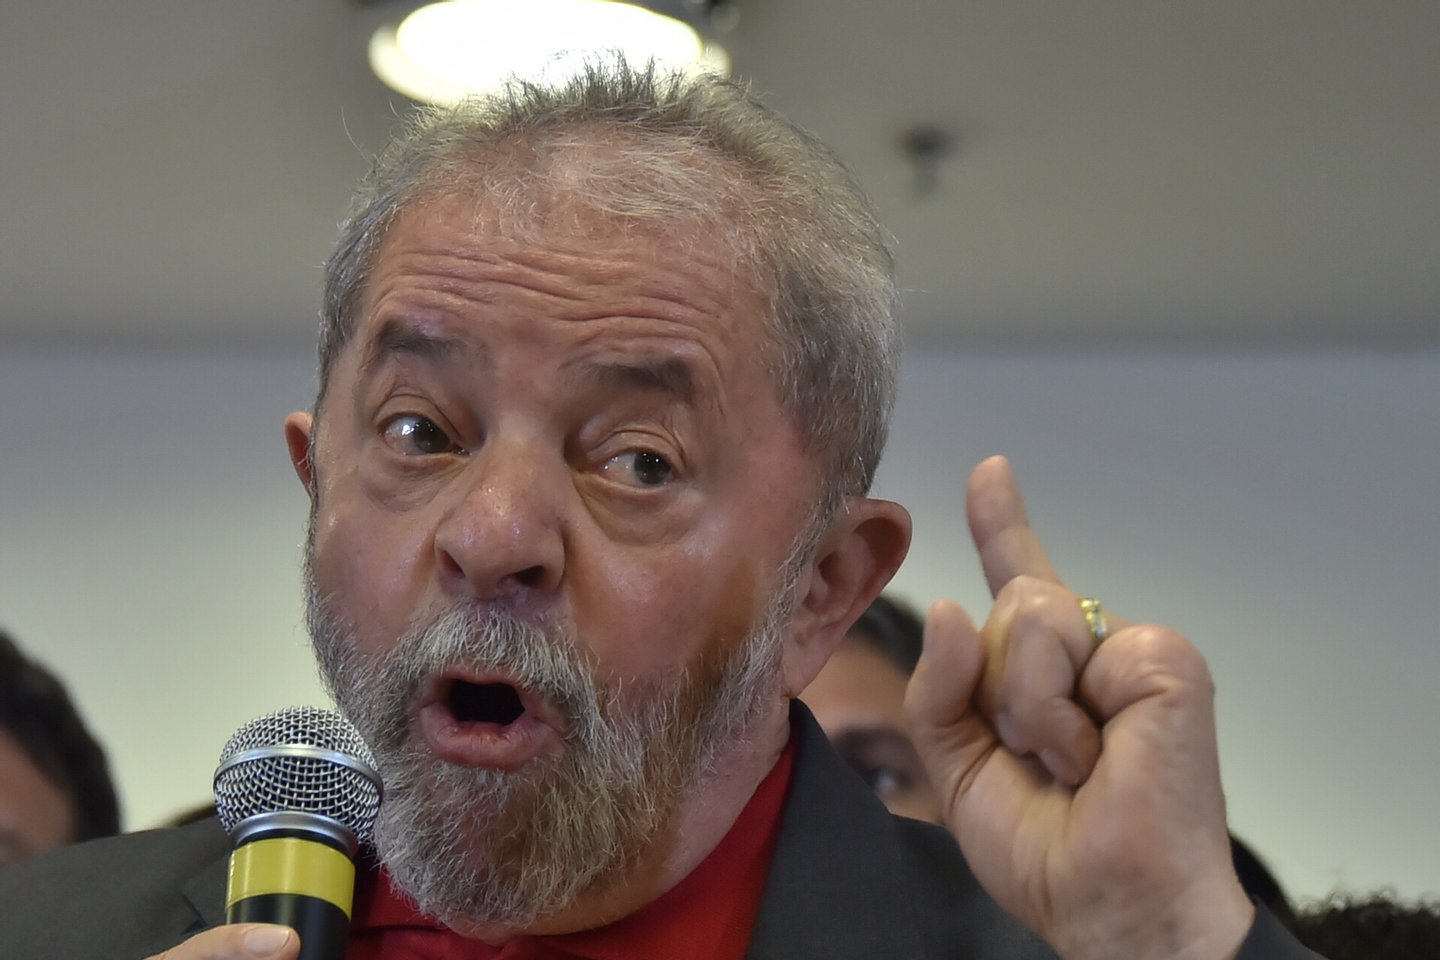 Brazilian former president Luiz Inacio Lula da Silva gestures during a press conference in Sao Paulo, Brazil on September 15, 2016. Lula da Silva defended himself against corruption charges Thursday, saying the case against him was an attempt to destroy him politically ahead of elections in 2018. / AFP / NELSON ALMEIDA (Photo credit should read NELSON ALMEIDA/AFP/Getty Images)